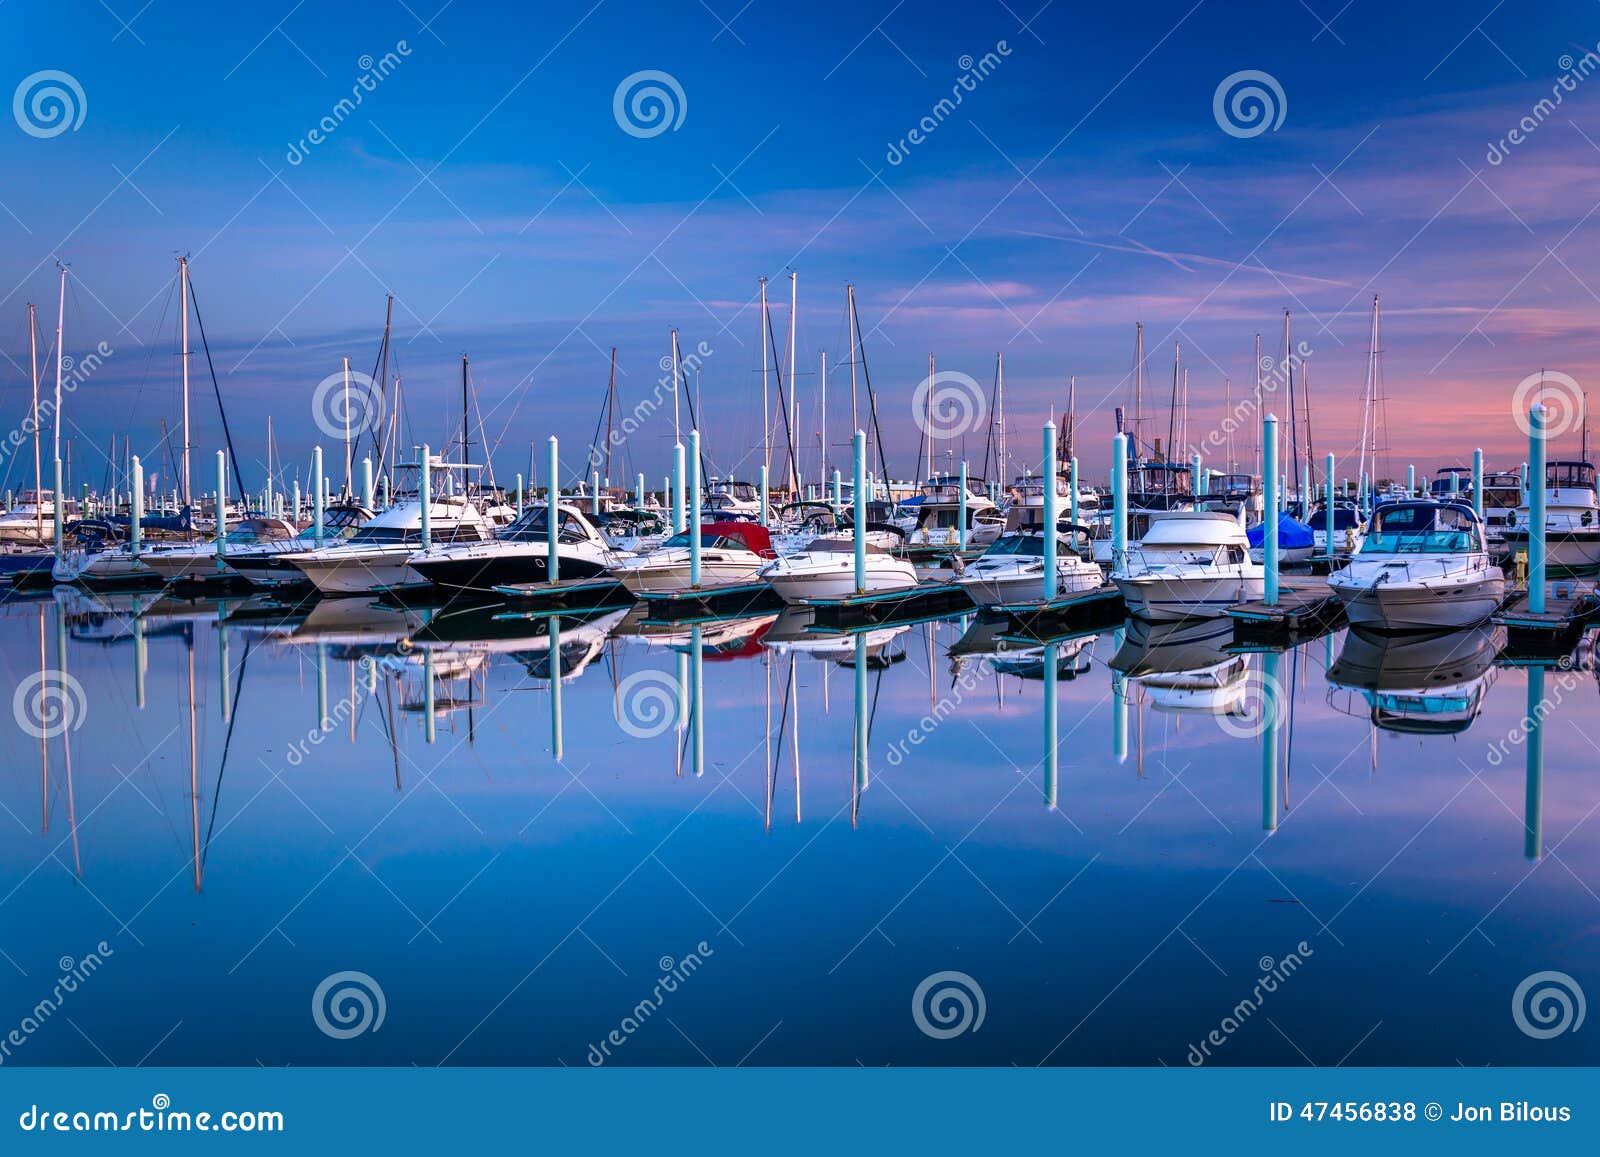 twilight reflections at a marina in canton, baltimore, maryland.